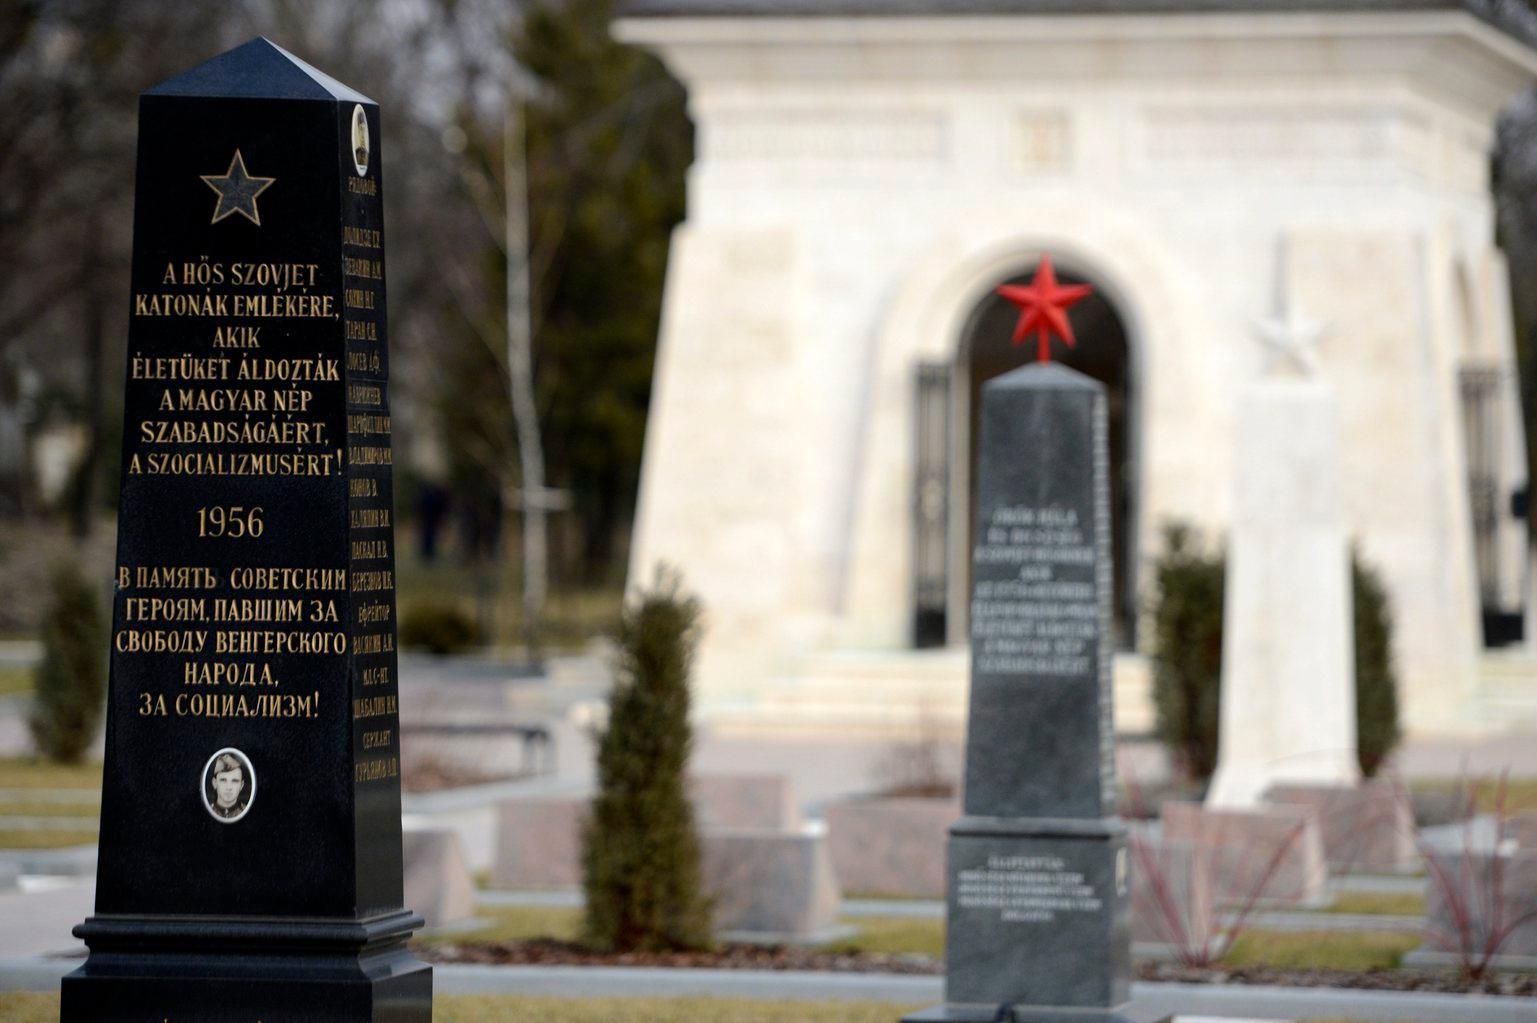 Hungary Asks Russia To Change 1956 Soviet Memorial Inscription